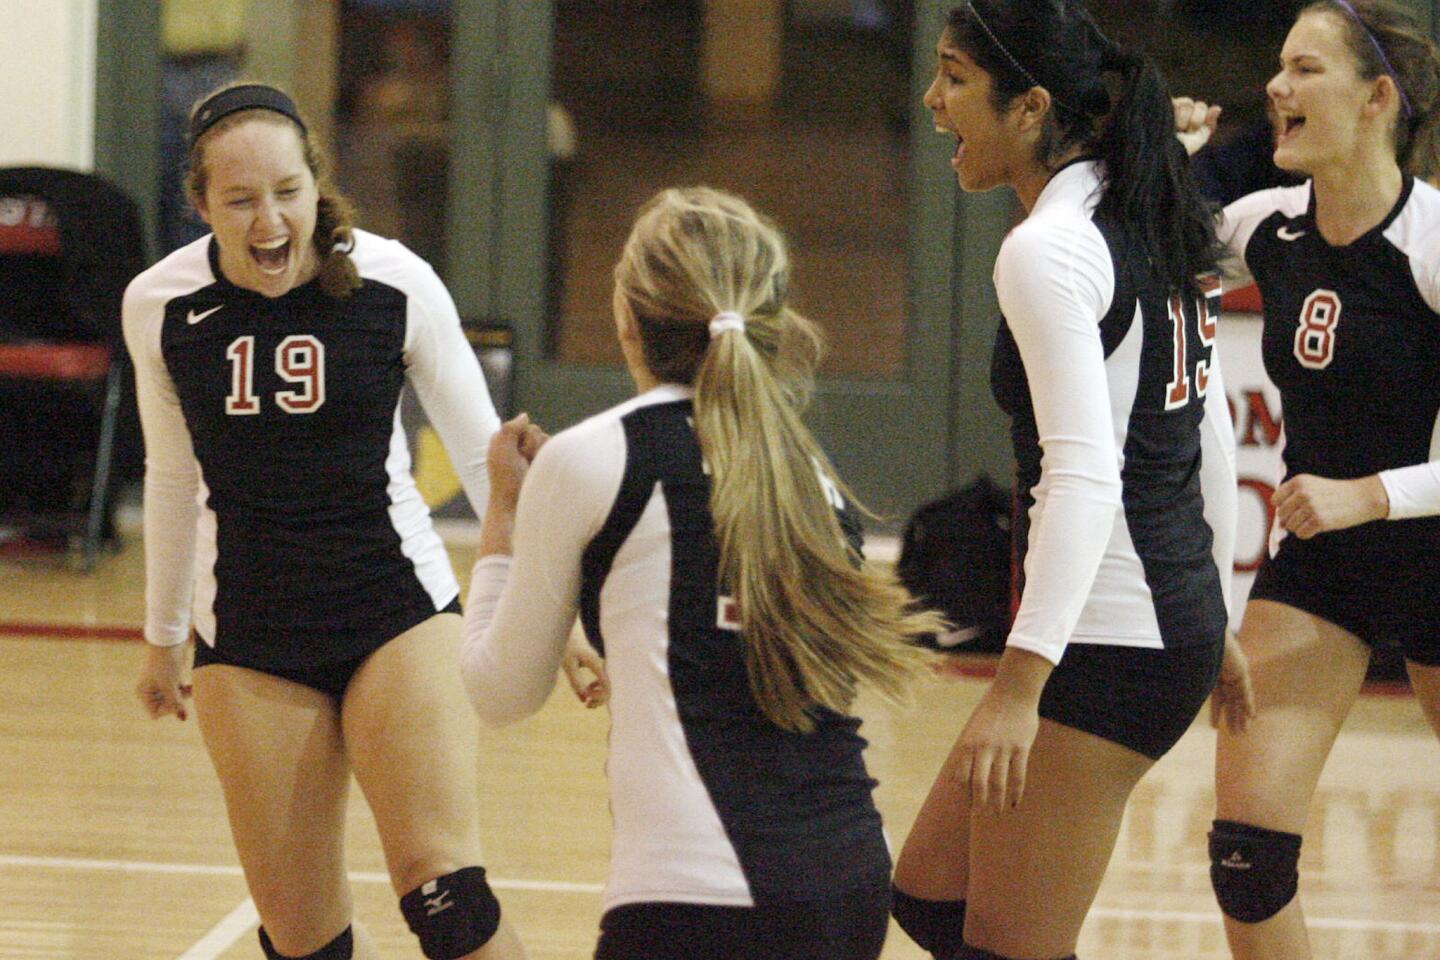 FSHA's Dana Carney, left, rejoices with her teammates after making a point during a game against Chaminade at Flintridge Sacred Heart Academy in La Canada on Thursday, October 11, 2012.